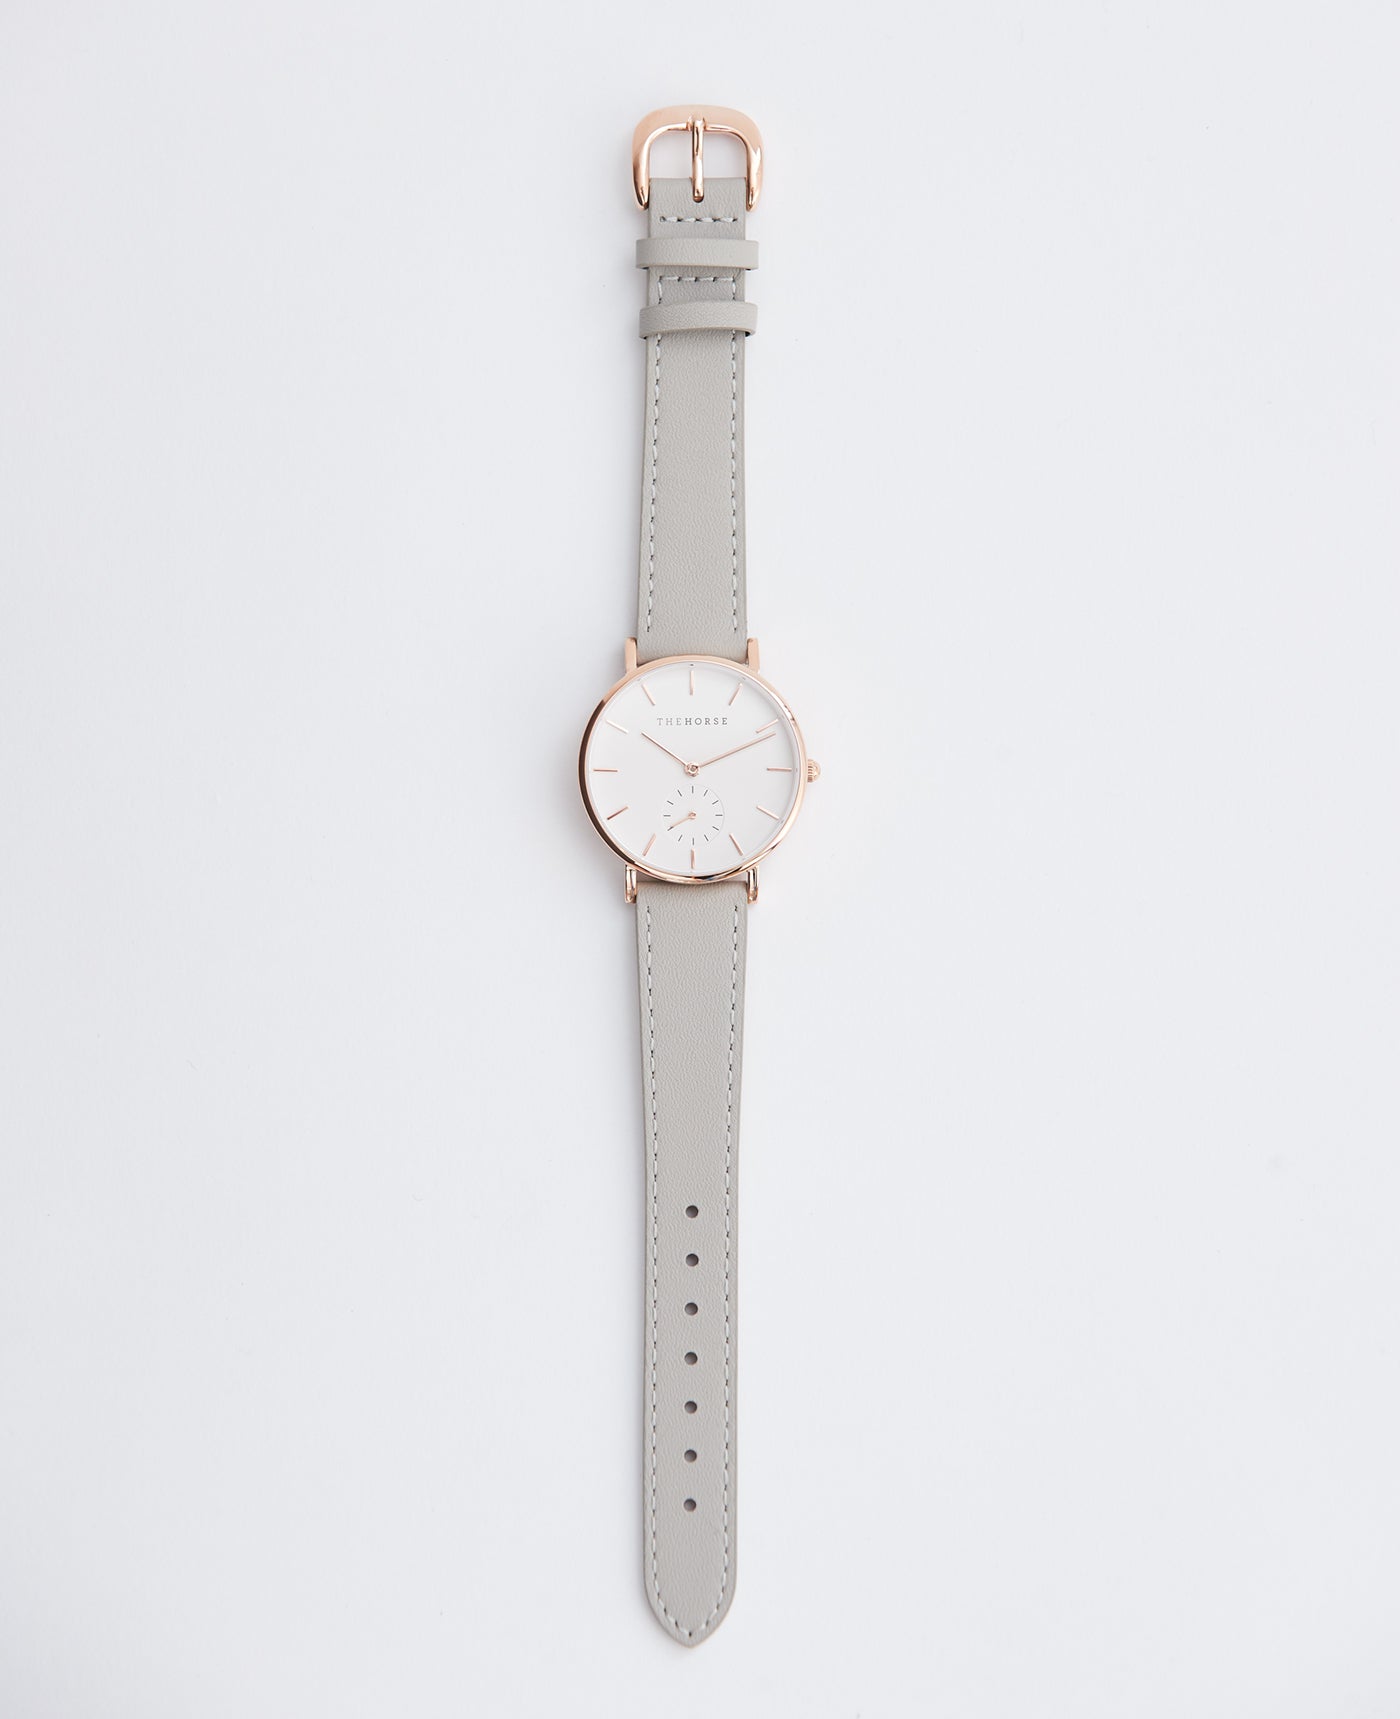 The Classic Watch in Rose Gold Case / White Dial / Light Grey Leather Strap by The Horse